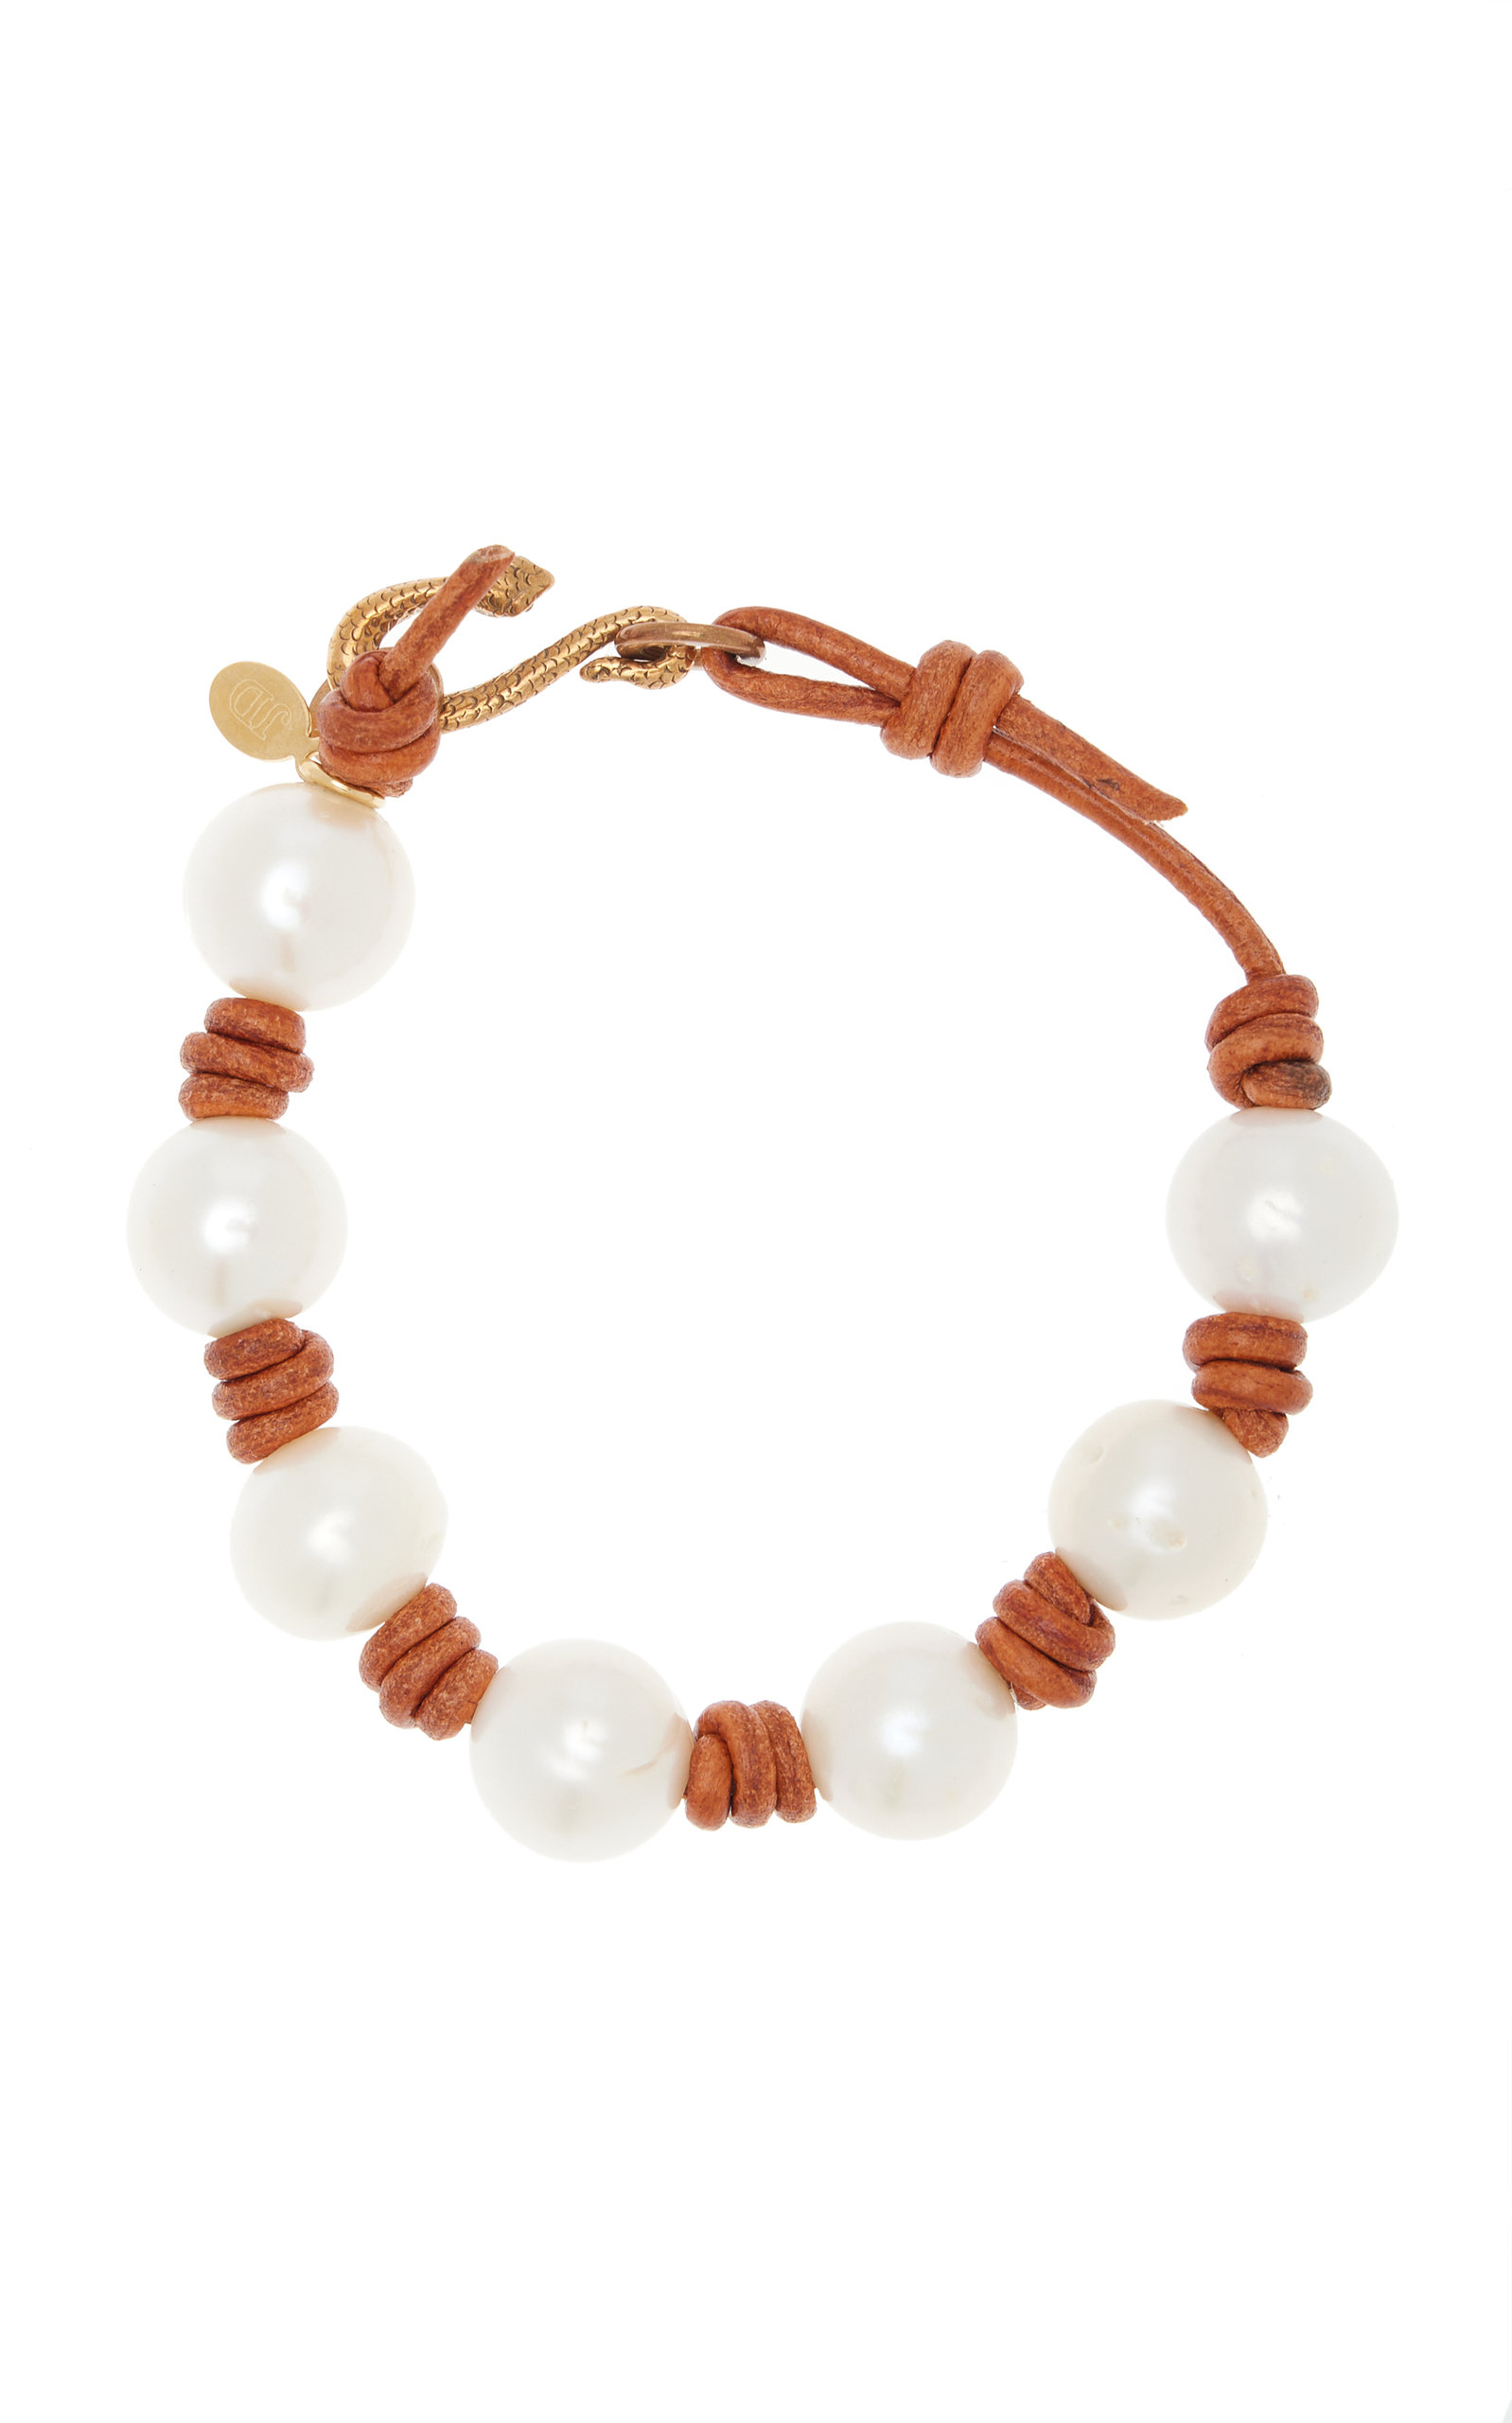 Joie DiGiovanni Women's Knotted Leather; Pearl Snake Bracelet